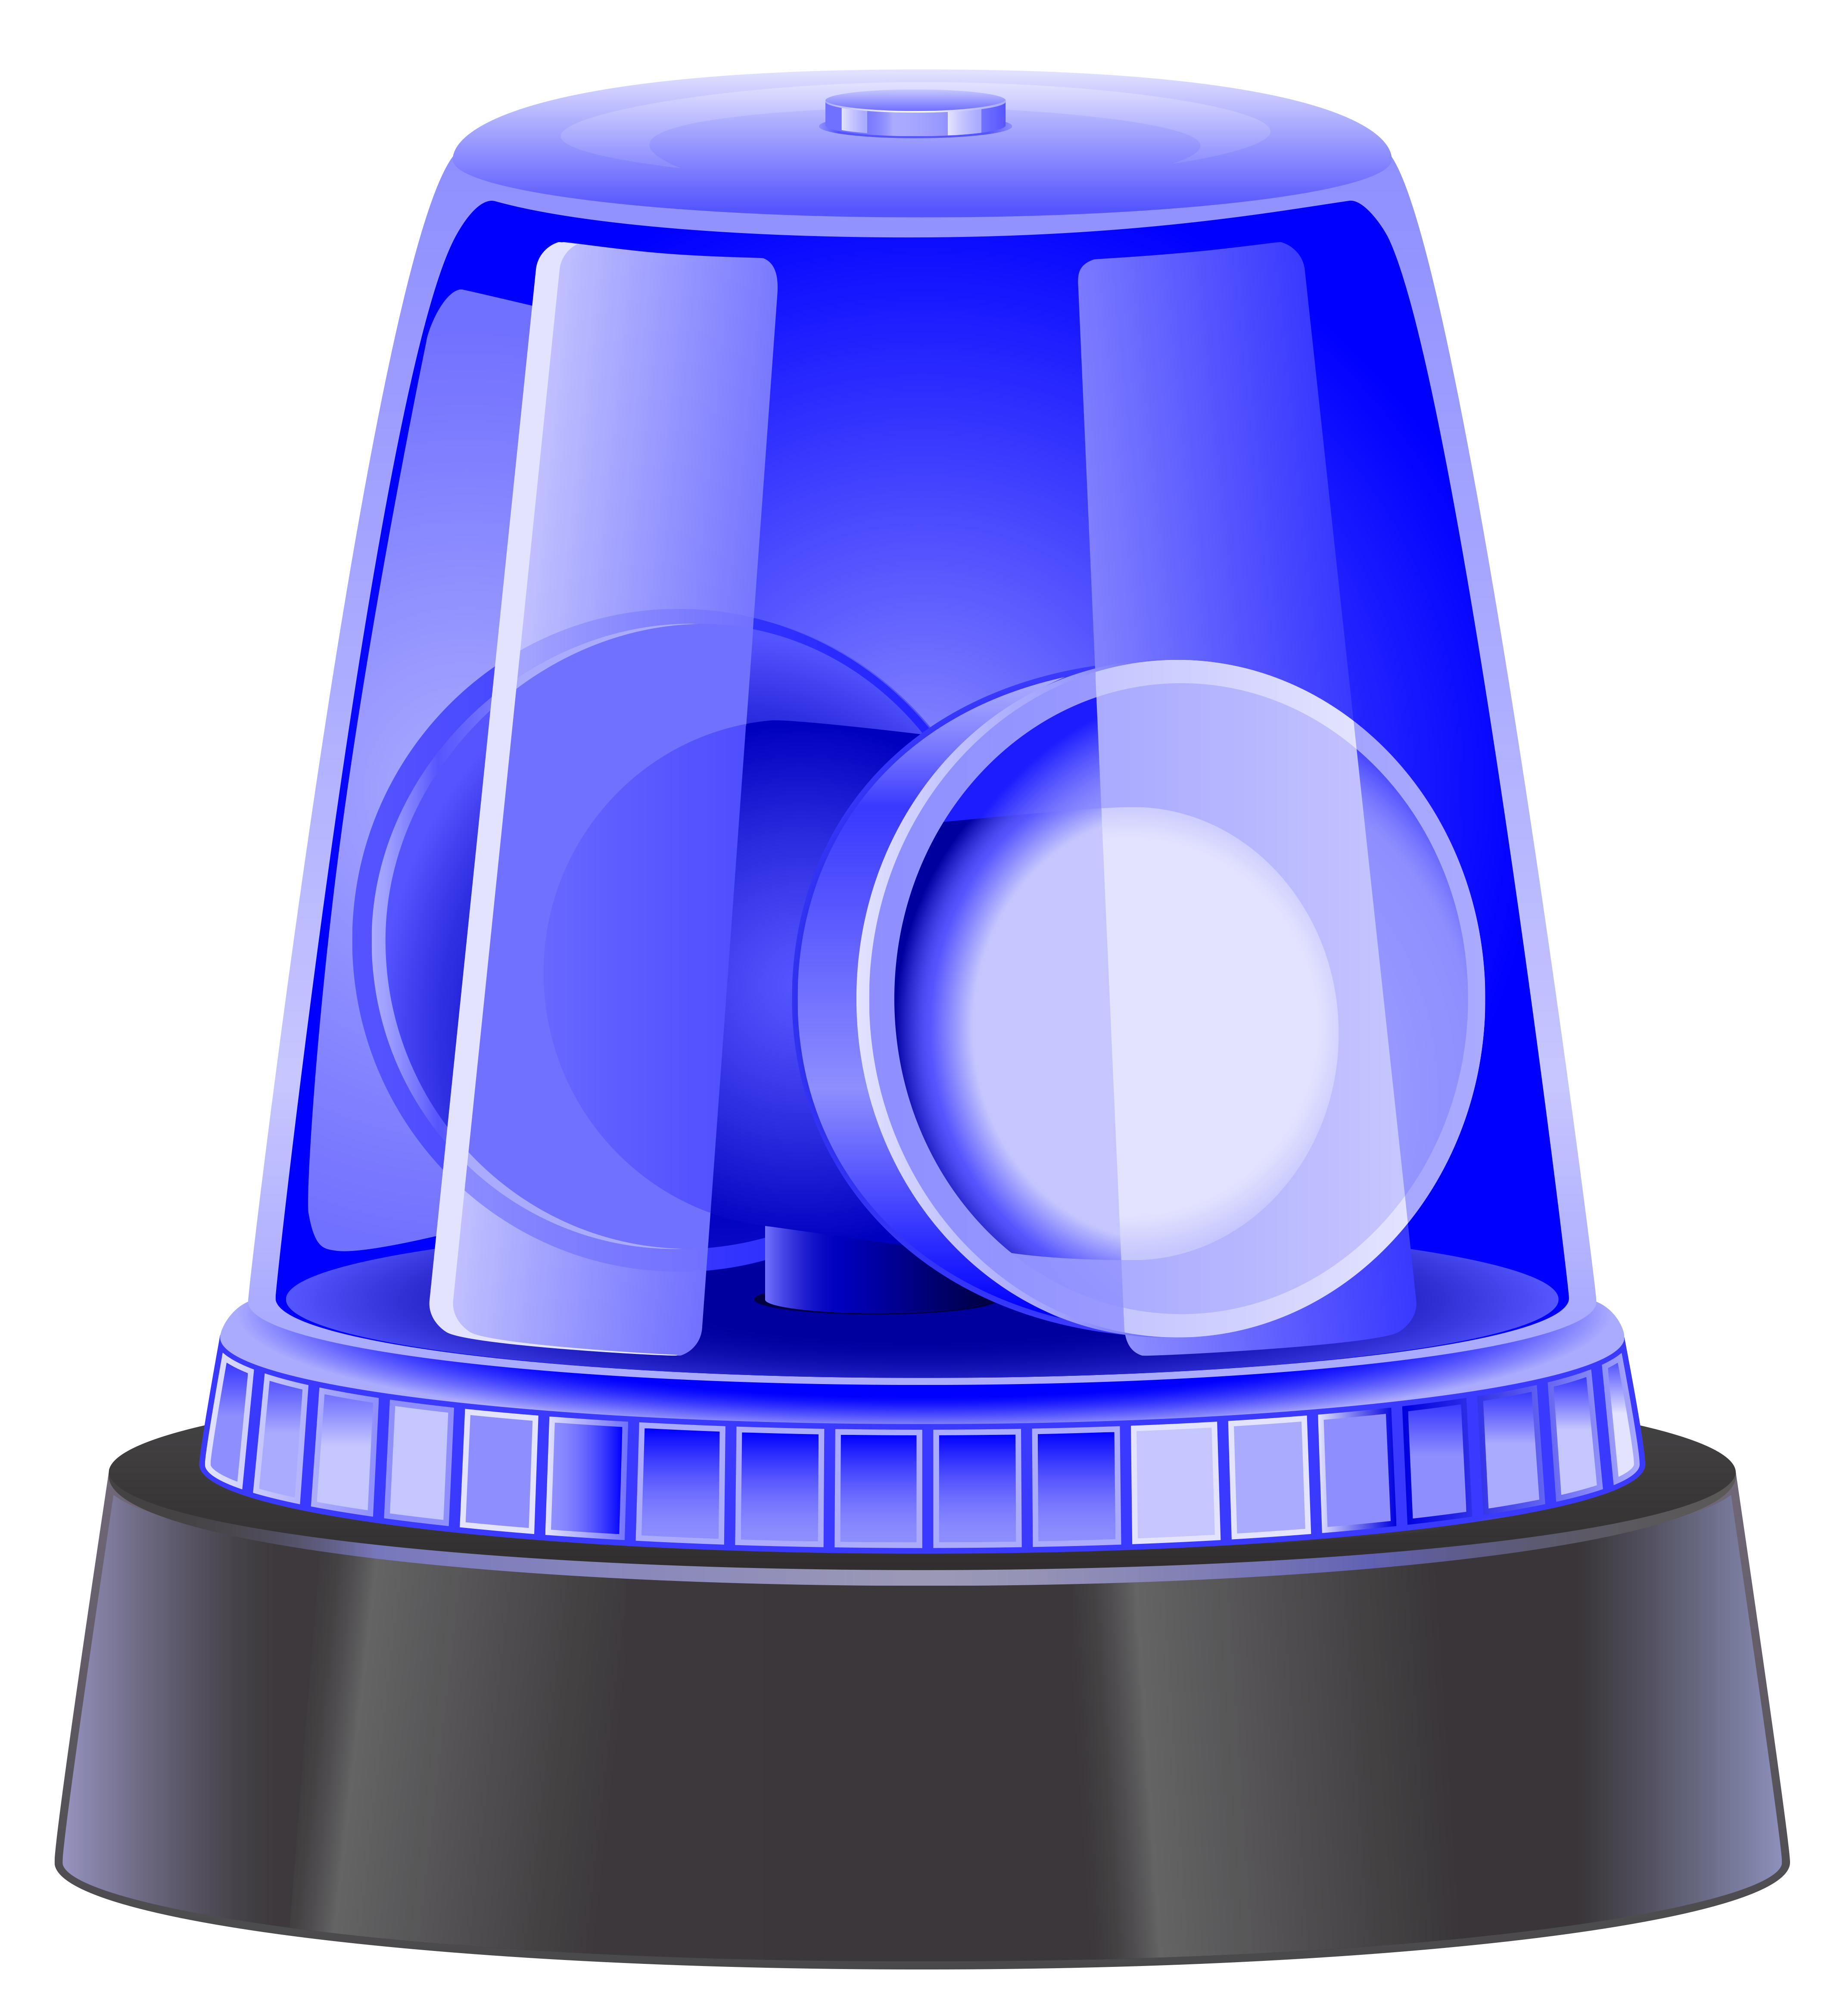 Blue Police Siren Png Clipart - Police Siren, Transparent background PNG HD thumbnail